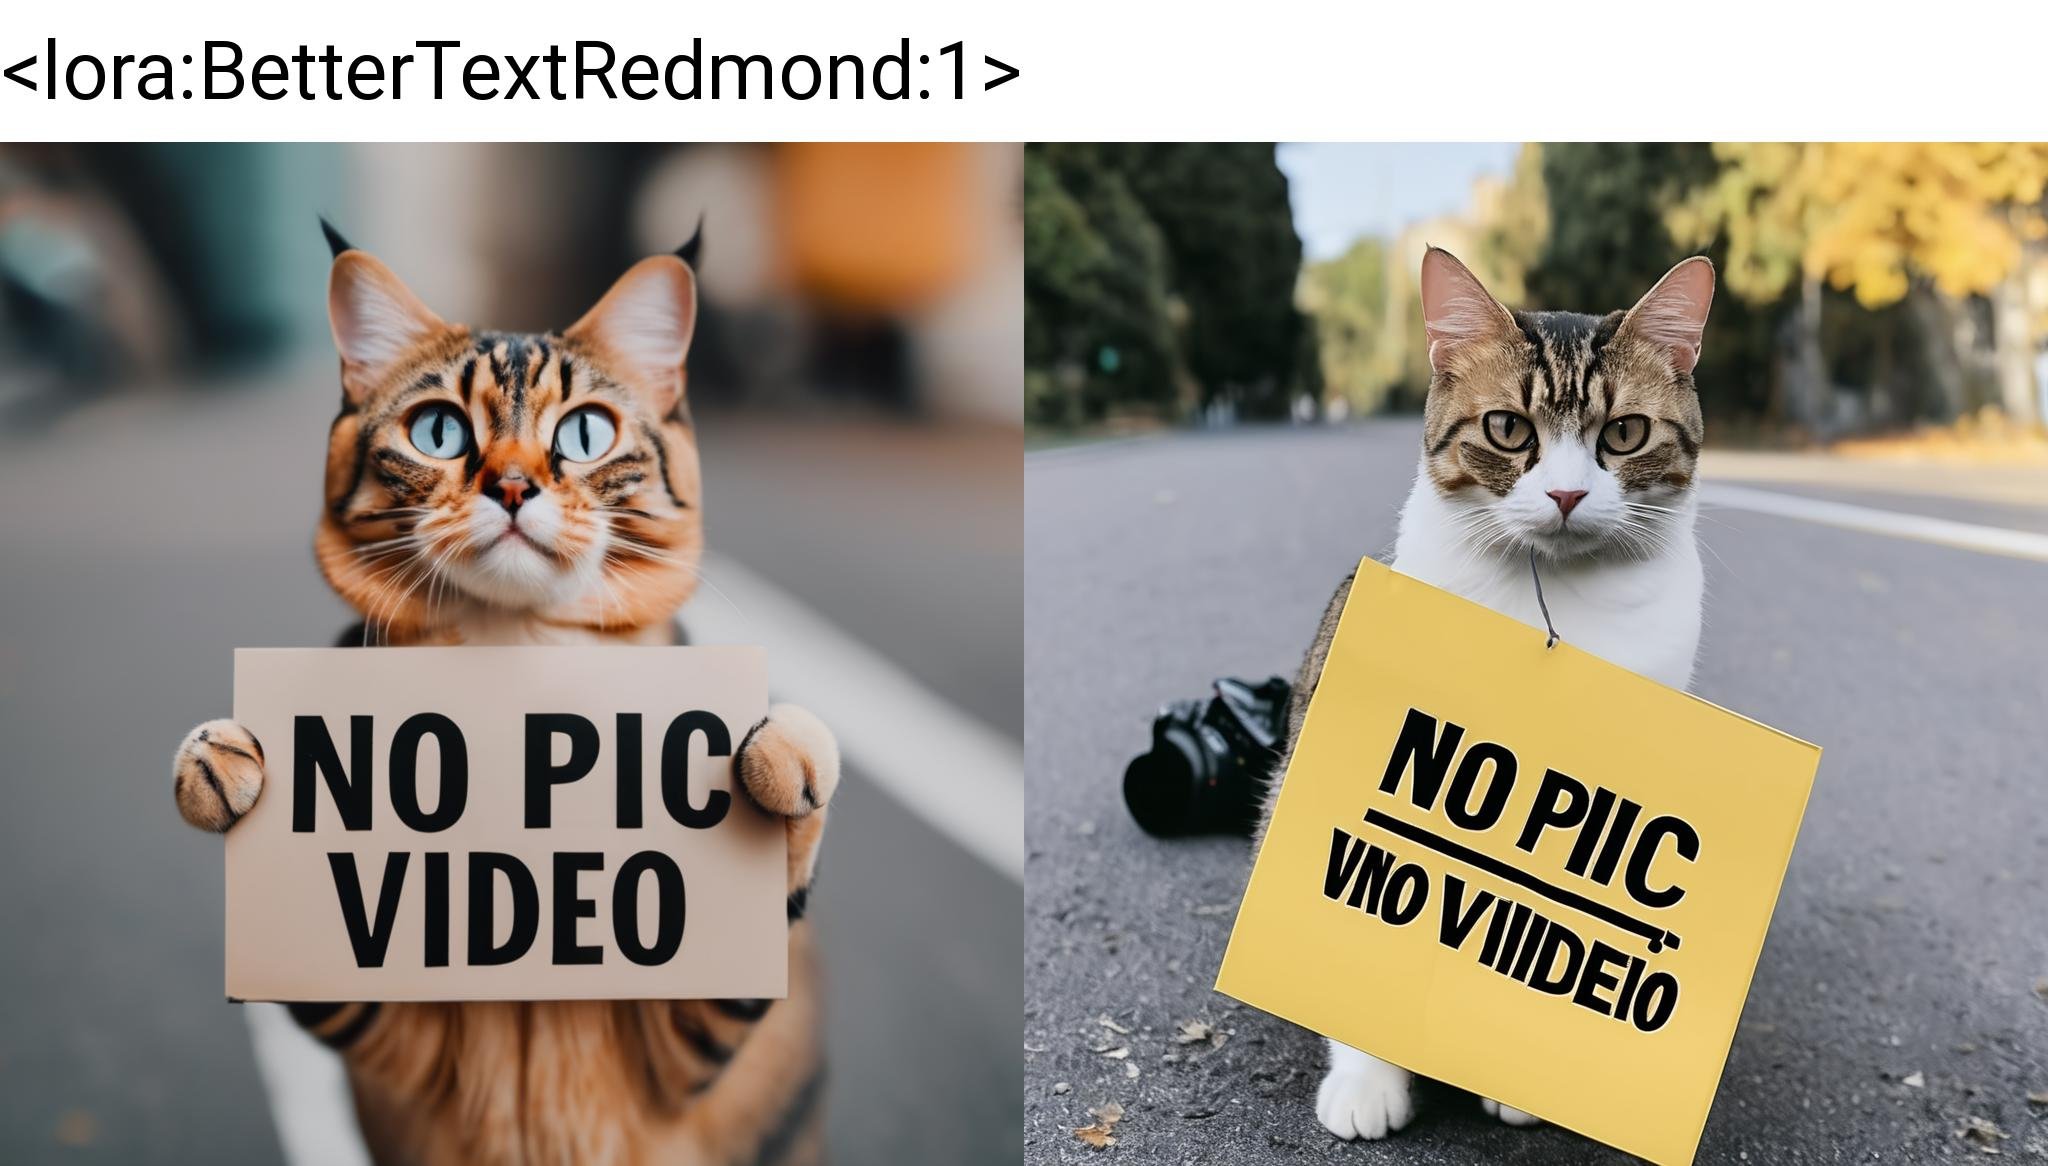 A cat holding a sign with "NO PIC NO VIDEO" on it, <lora:BetterTextRedmond:1>